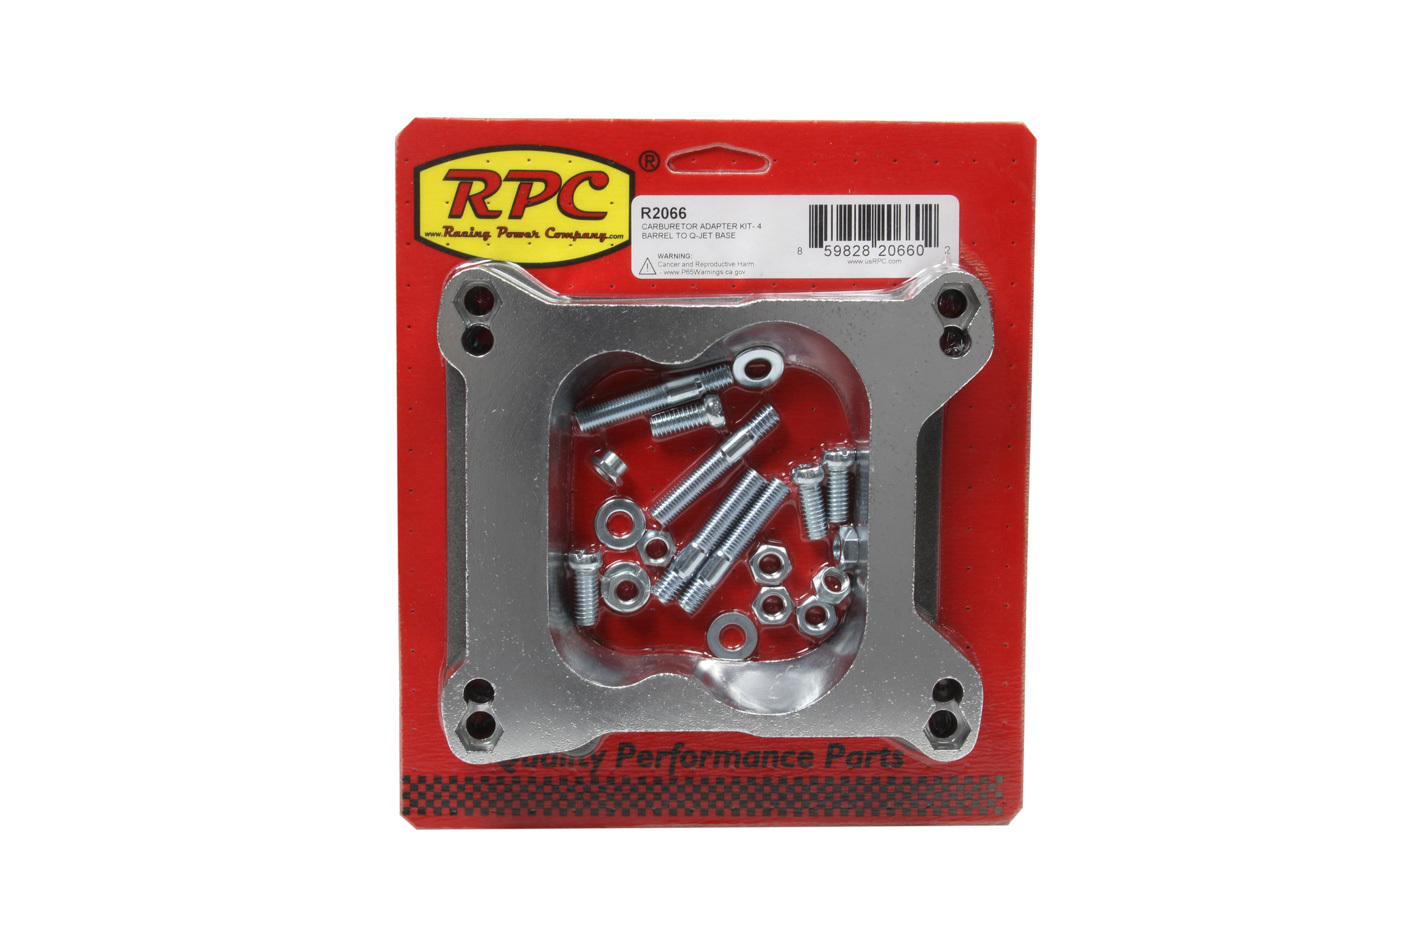 Racing Power Company R2066 Carburetor Adapter, 3/4 in Thick, Open, Square Bore to Spread Bore, Aluminum, Natural, Each